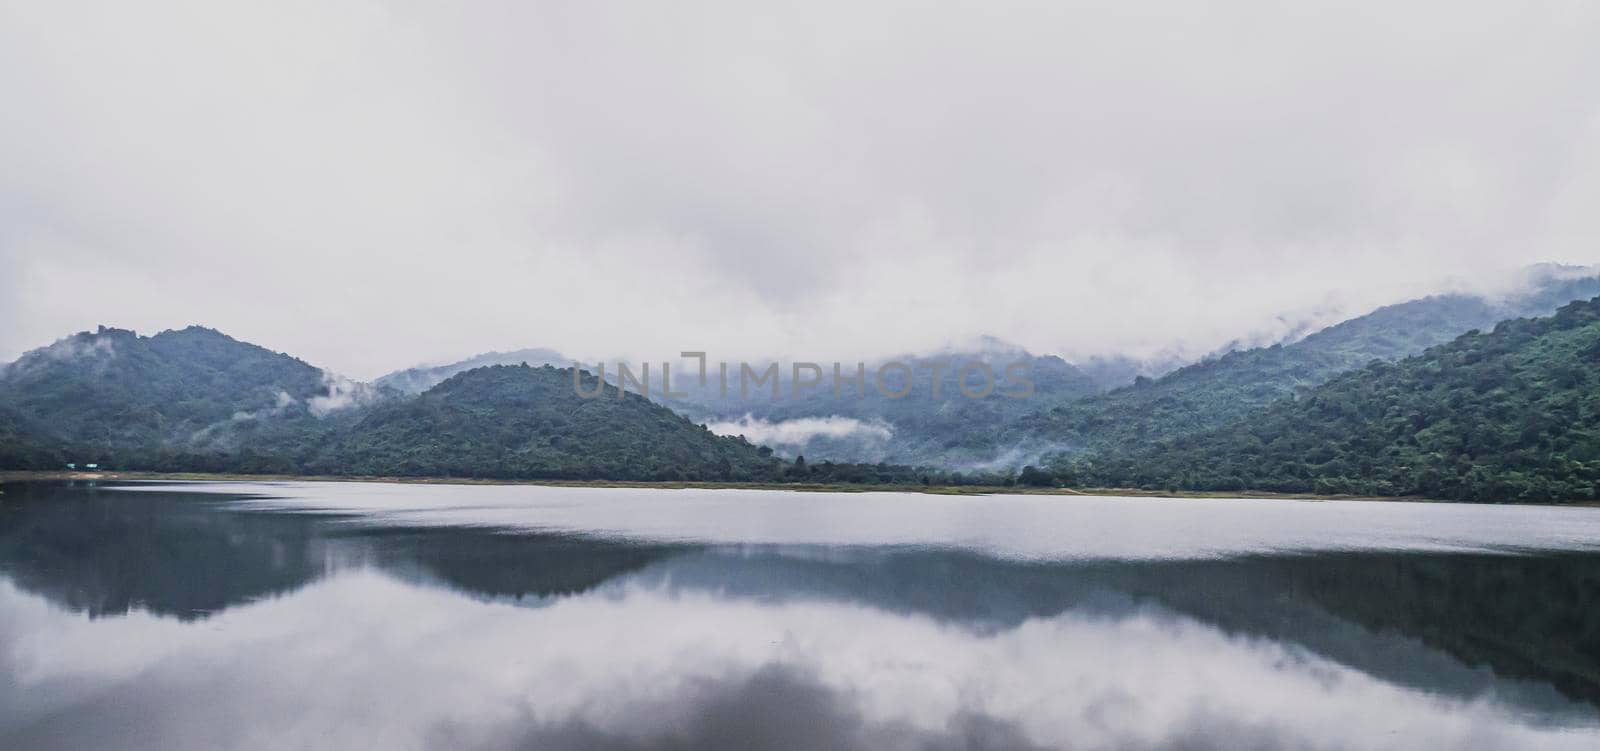 Panorama view of  mountains Lake with tropical trees forest . Beautiful A Calm Lake With Mountain ranges on background . Wonderful atmospheric landscape